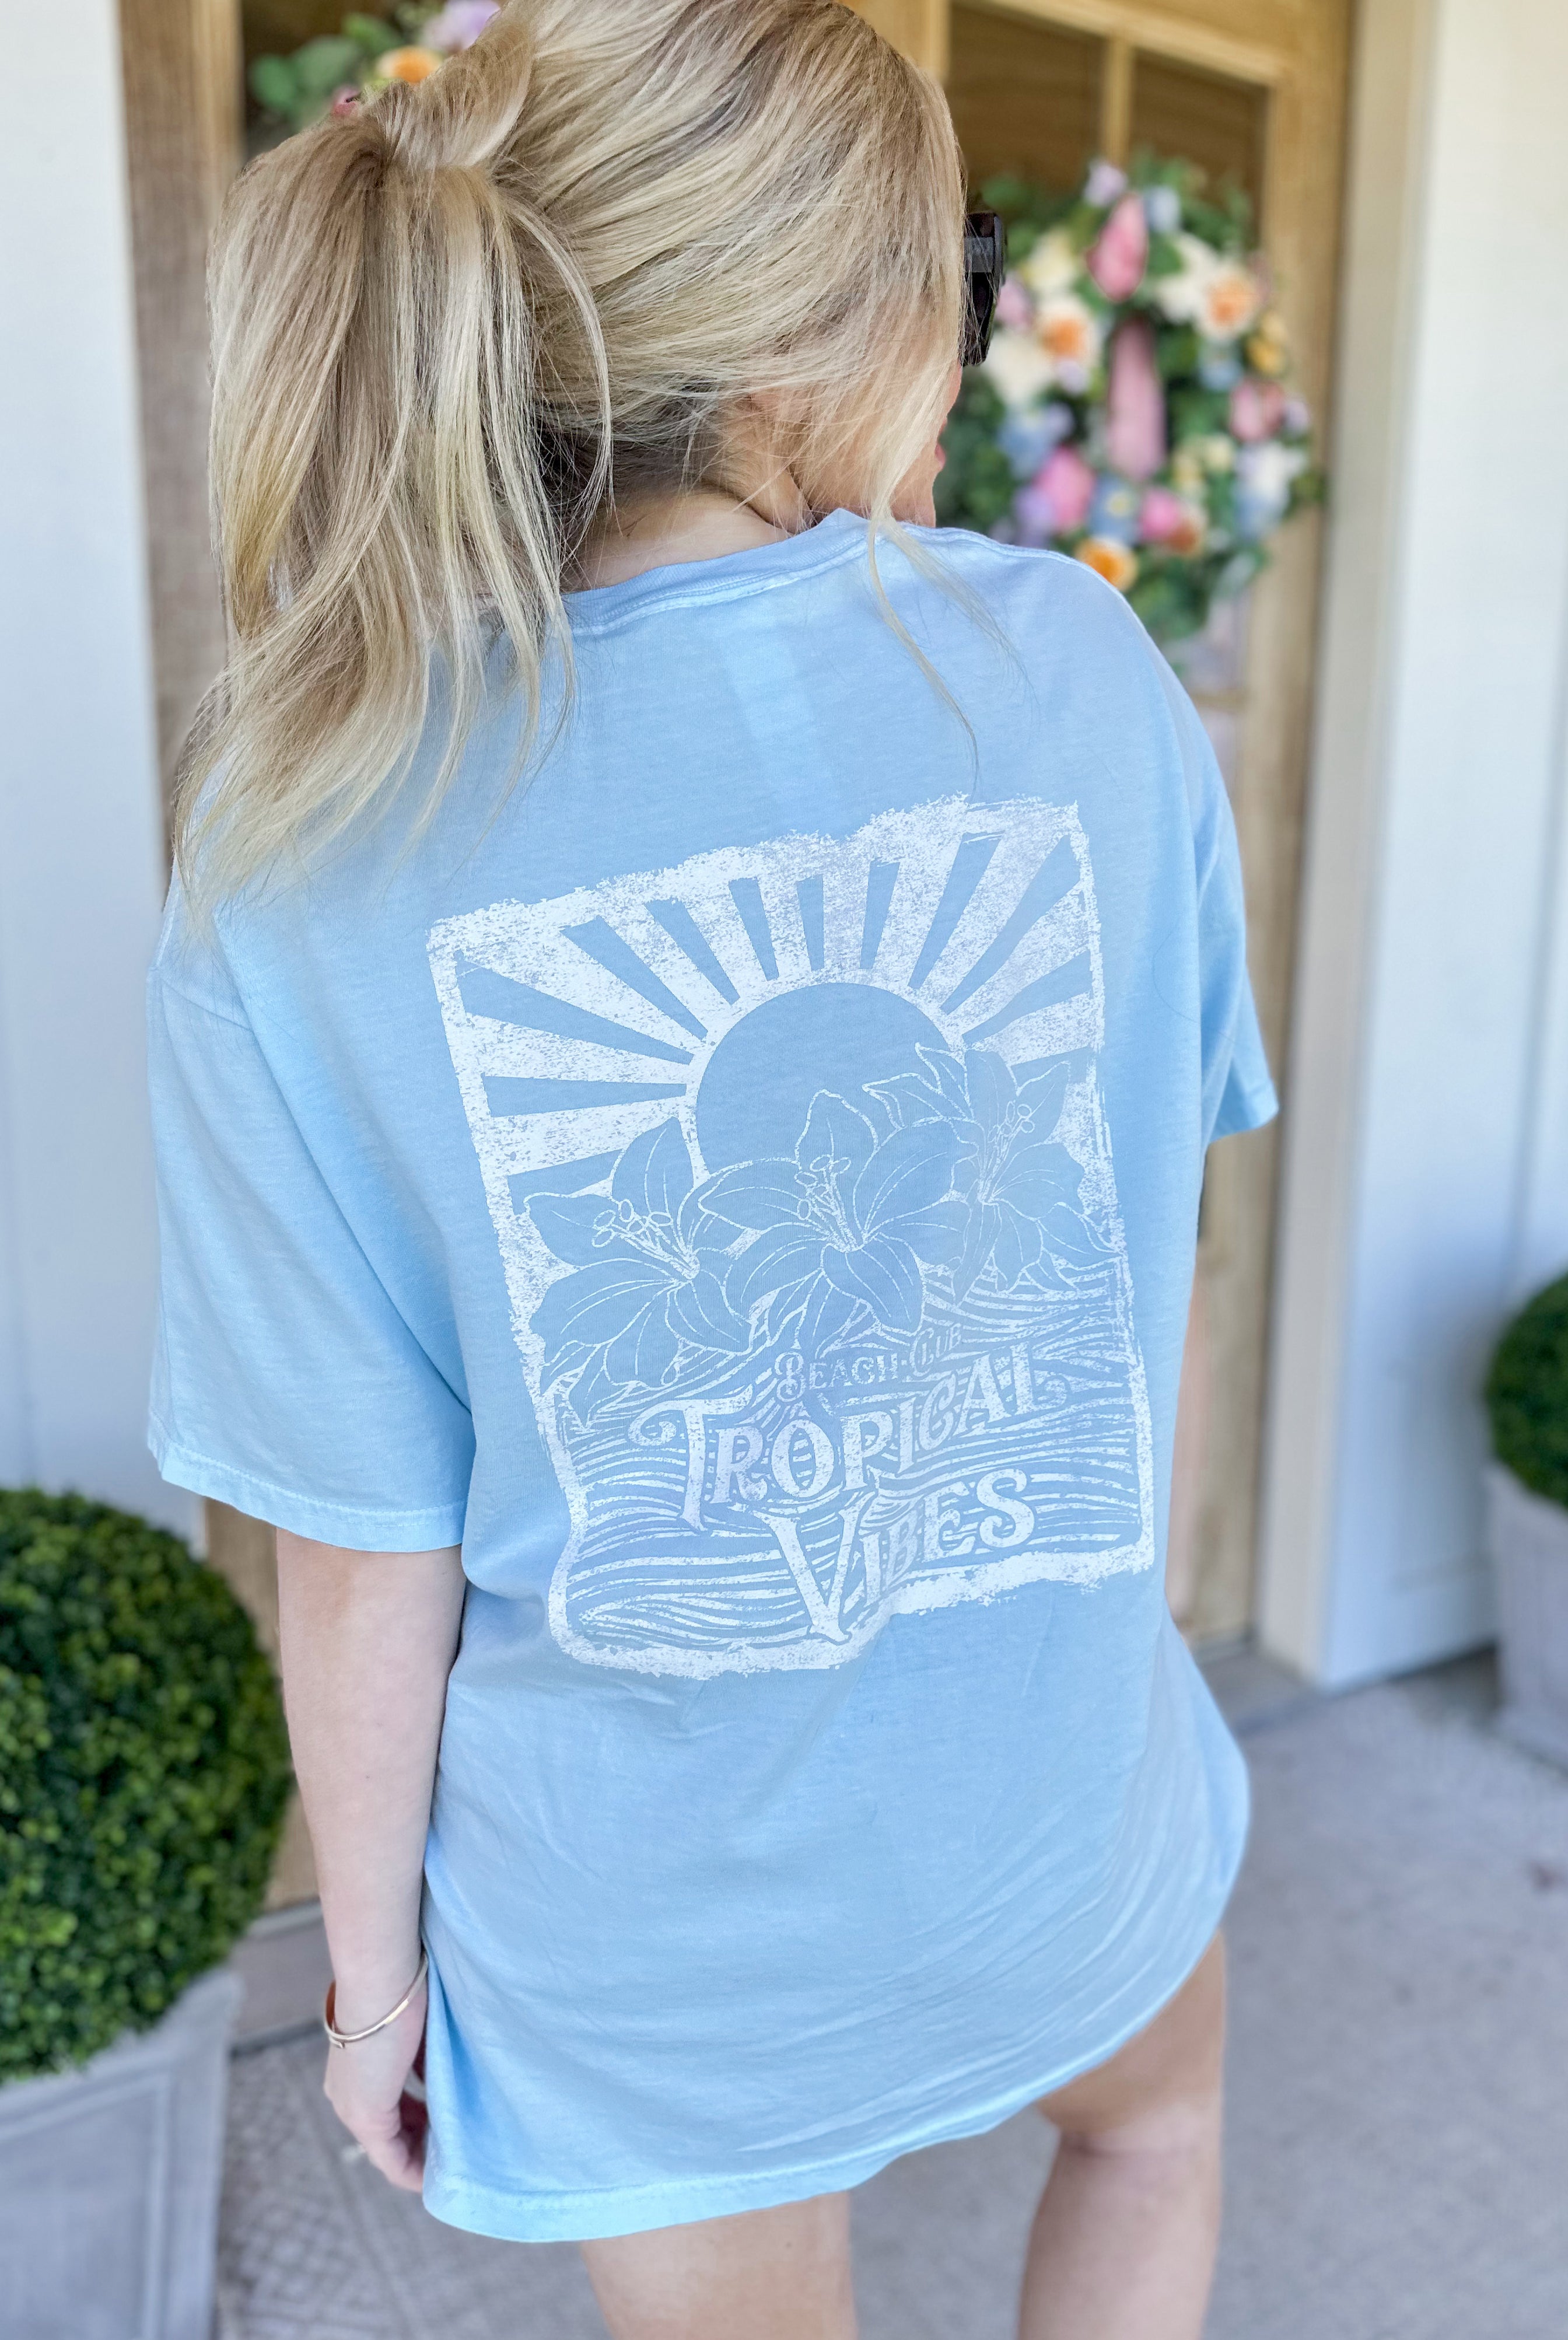 Tropical Vibes Vintage Oversized Short Sleeve Graphic Tee - Be You Boutique